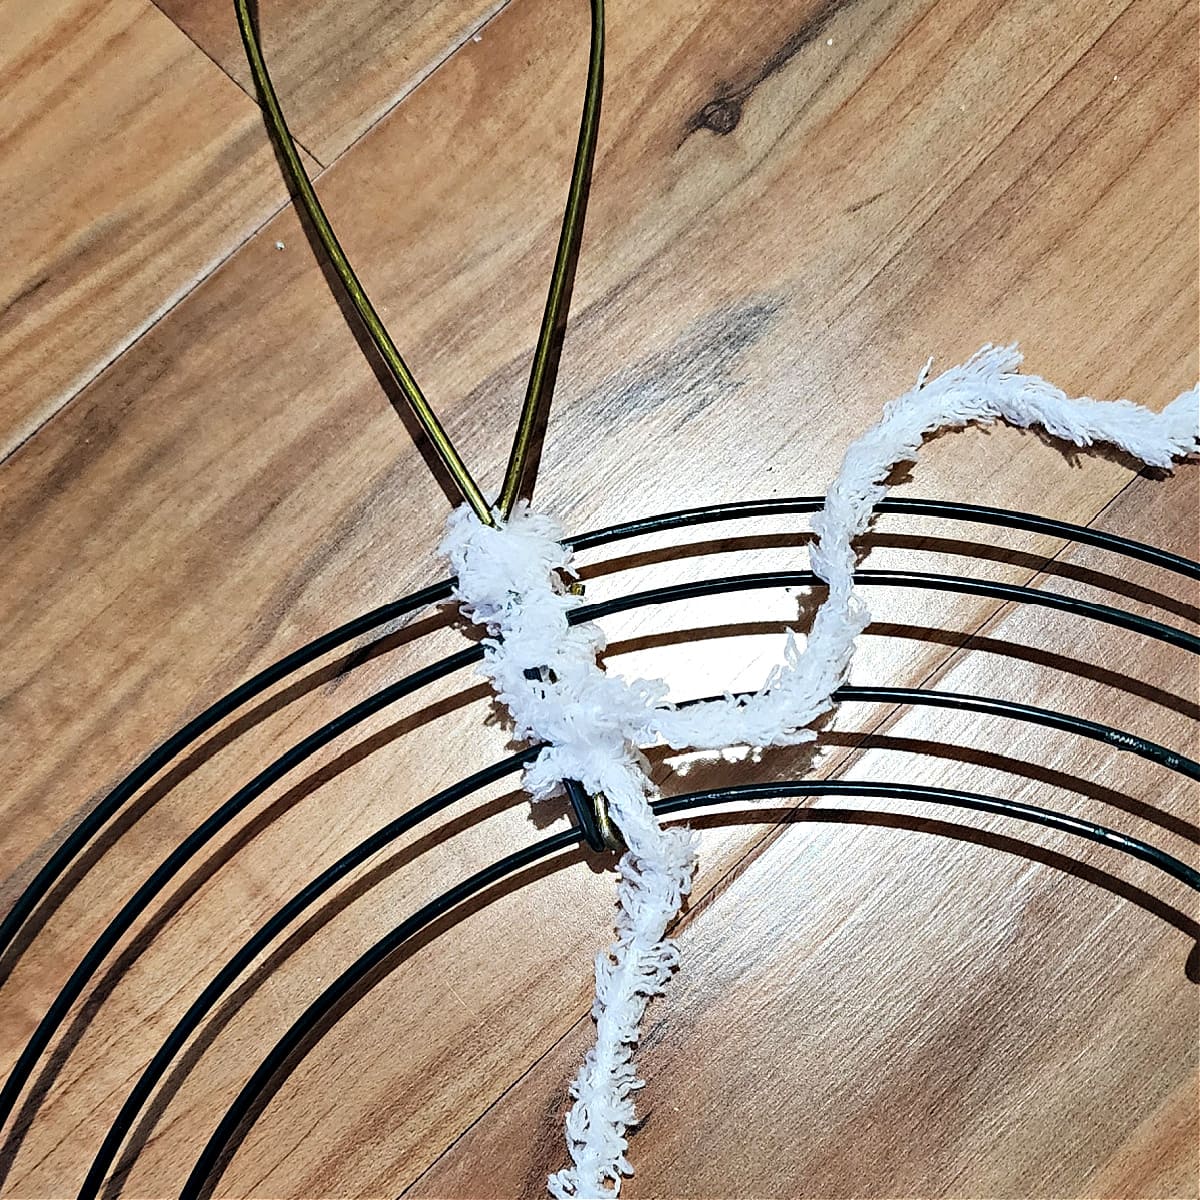 Yarn being wrapped around end of bunny ear and wire wreath form to secure bunny ear.